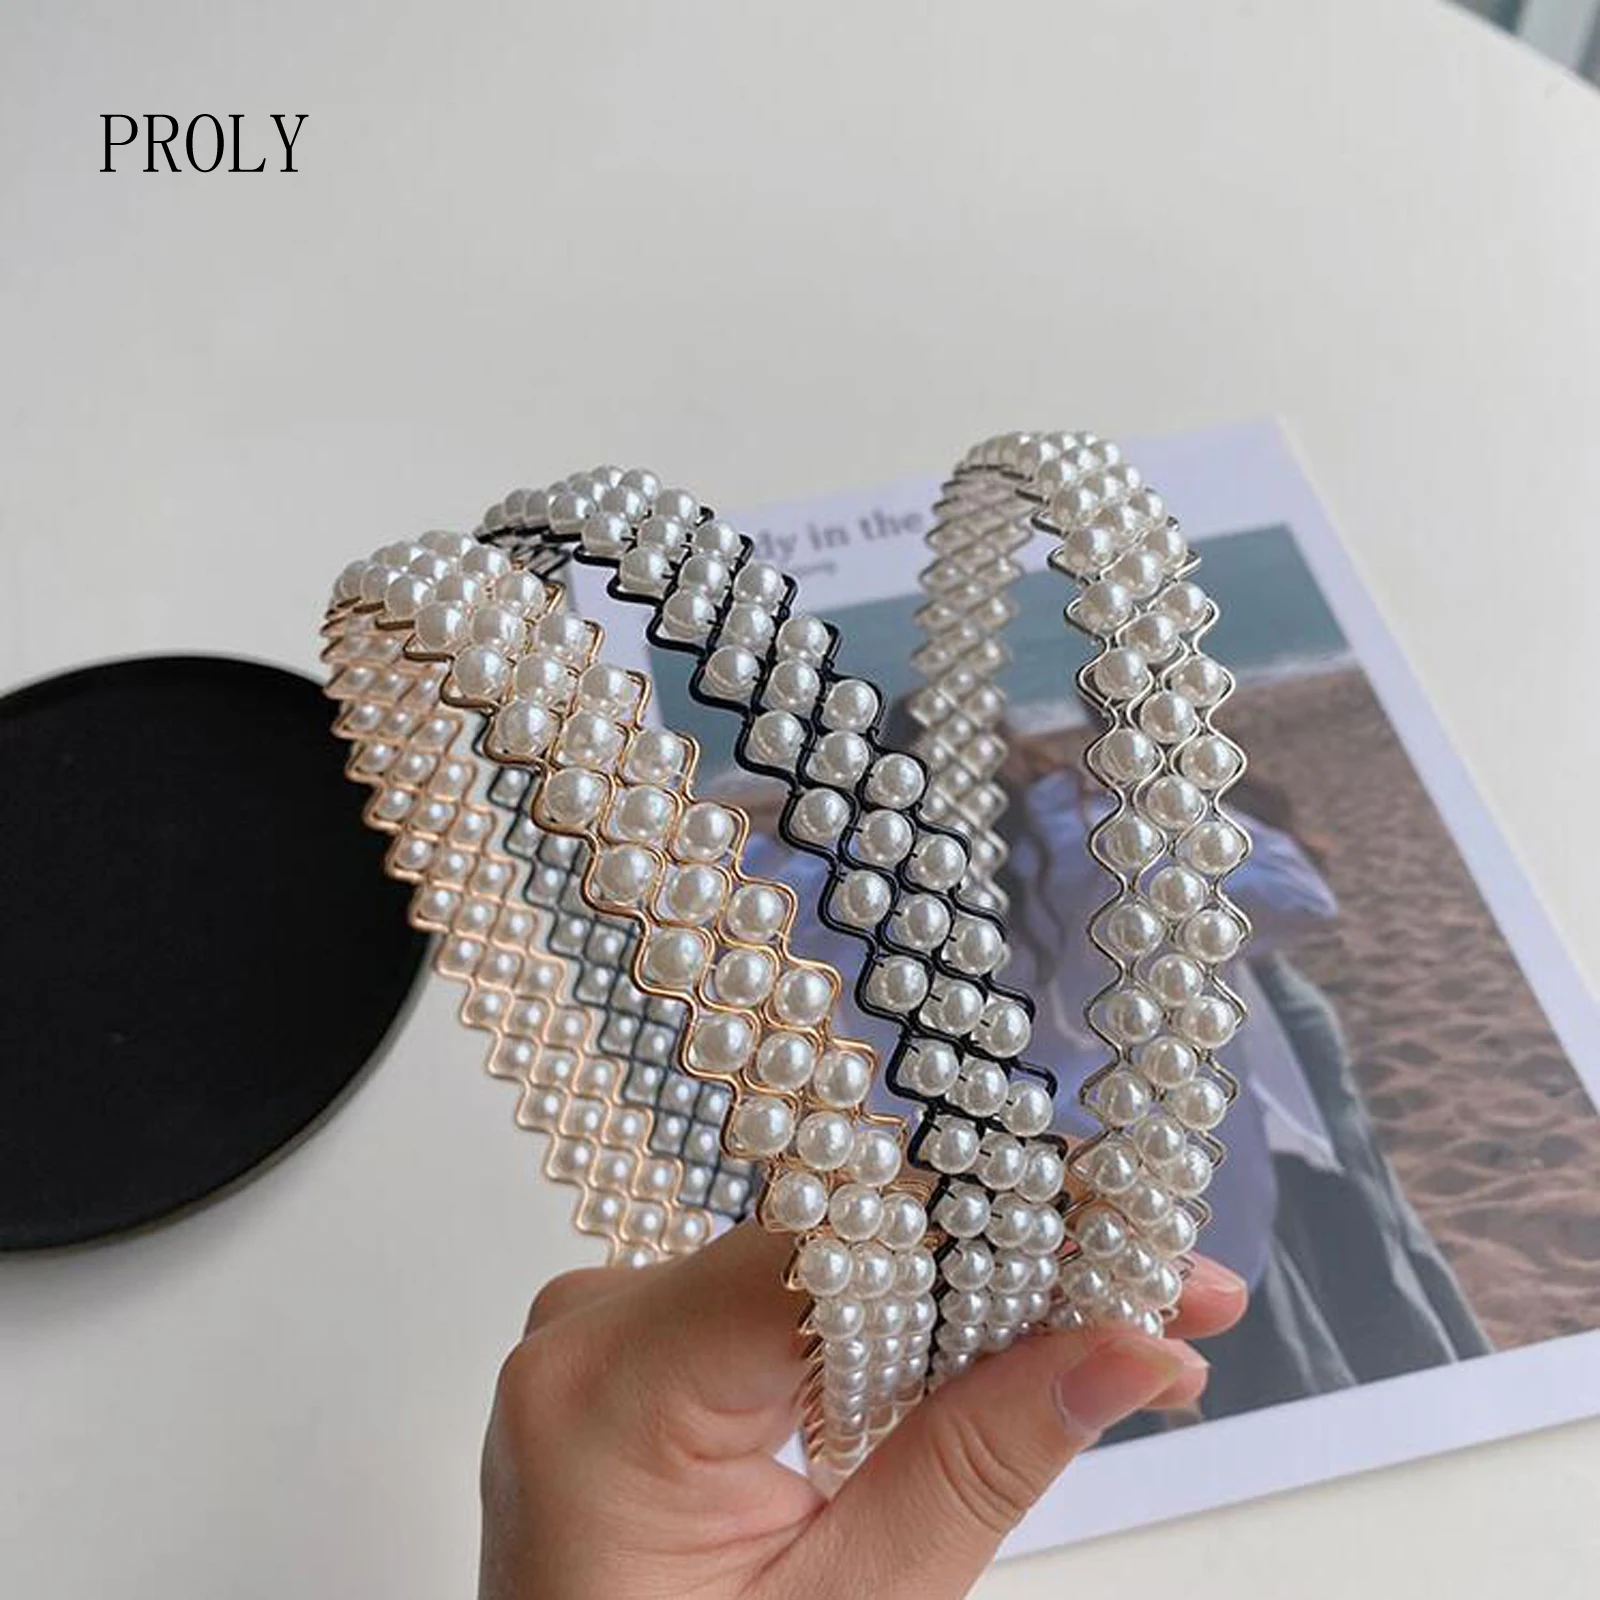 

PROLY New Fashion Women Headband Cross Braided Pearls Hairband Gold Silver Turban Casual Top Quality Baroque Hair Accessories